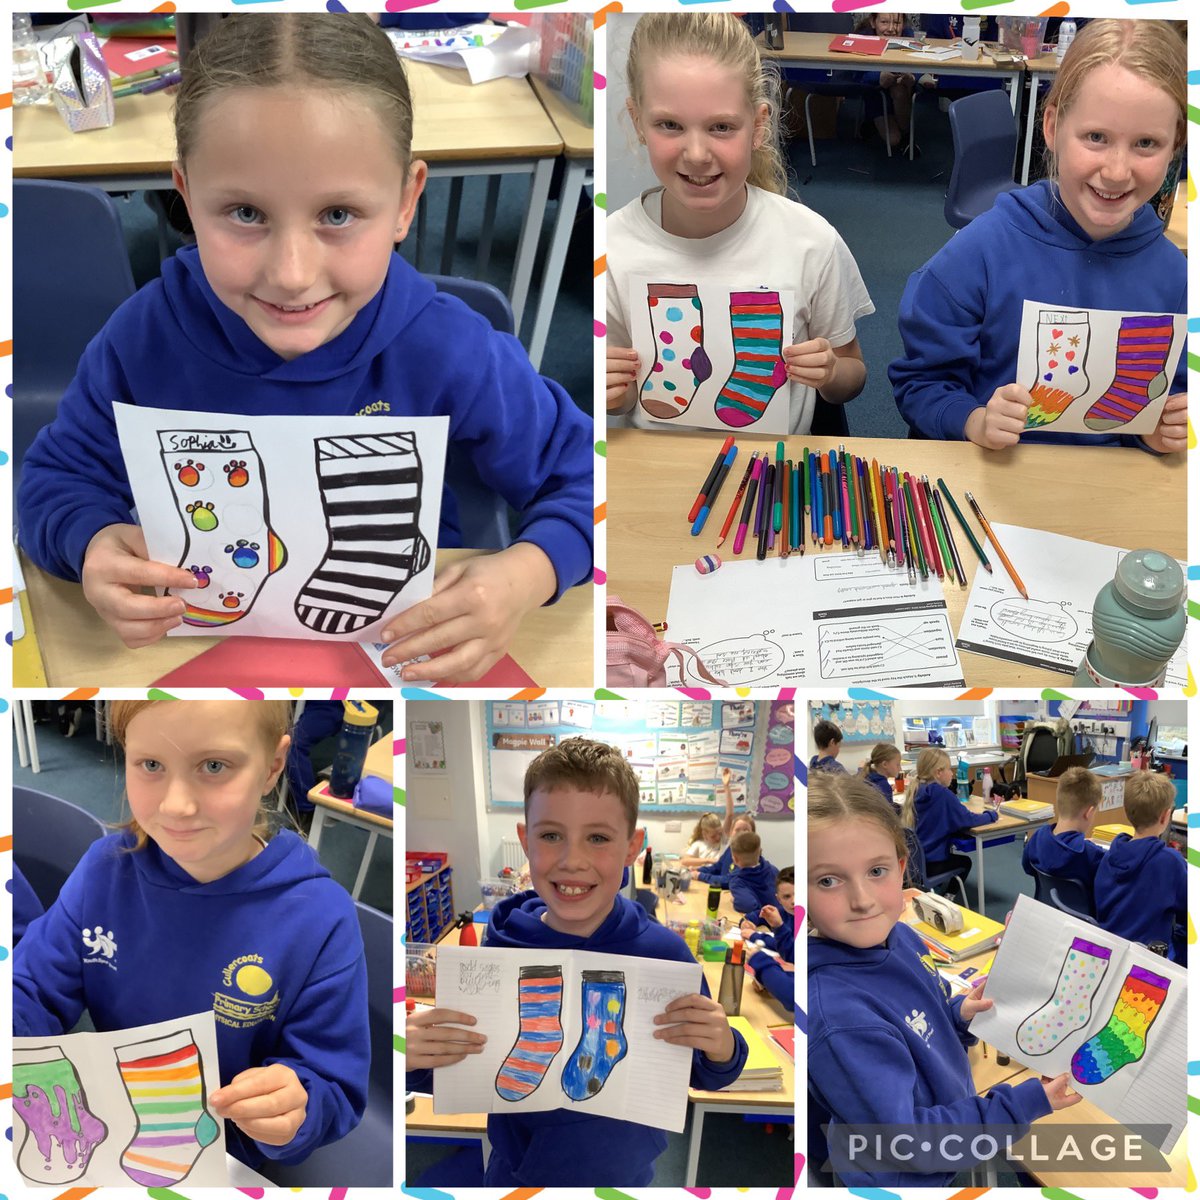 Today 5WP have not only been wearing odd socks but have also designed their own! We’ve been talking about all things anti-bullying too #OddSocks #AntiBullyingWeek